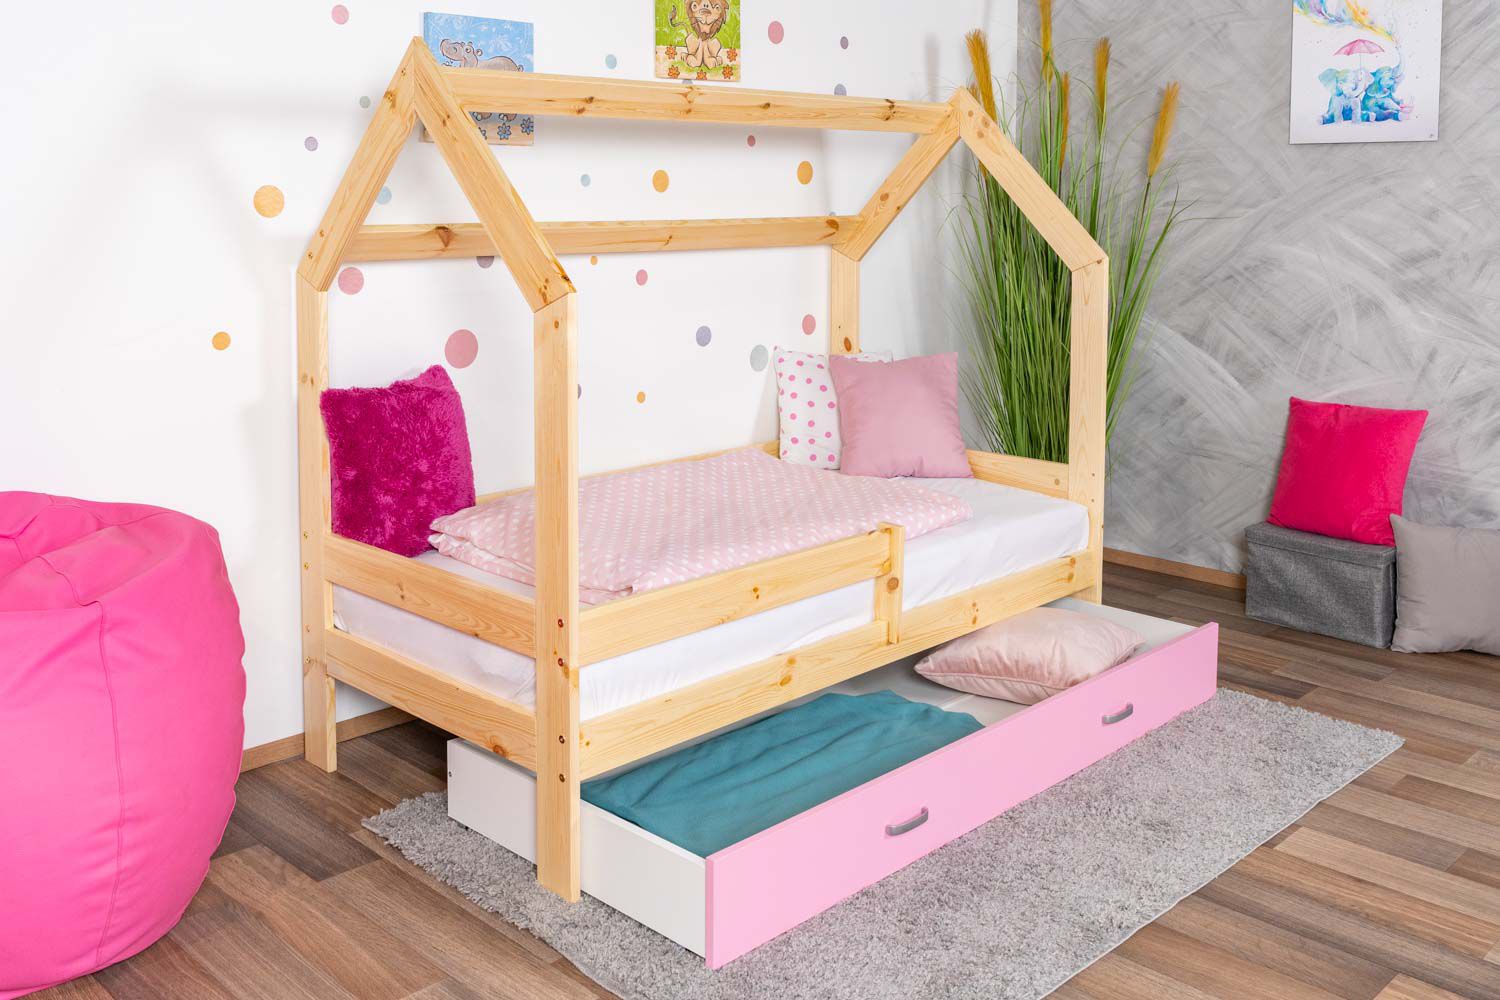 Children's bed / House bed, solid pine wood, Natural D3, drawer: pink, incl. slatted frame - Lying surface: 80 x 160 cm (w x l)